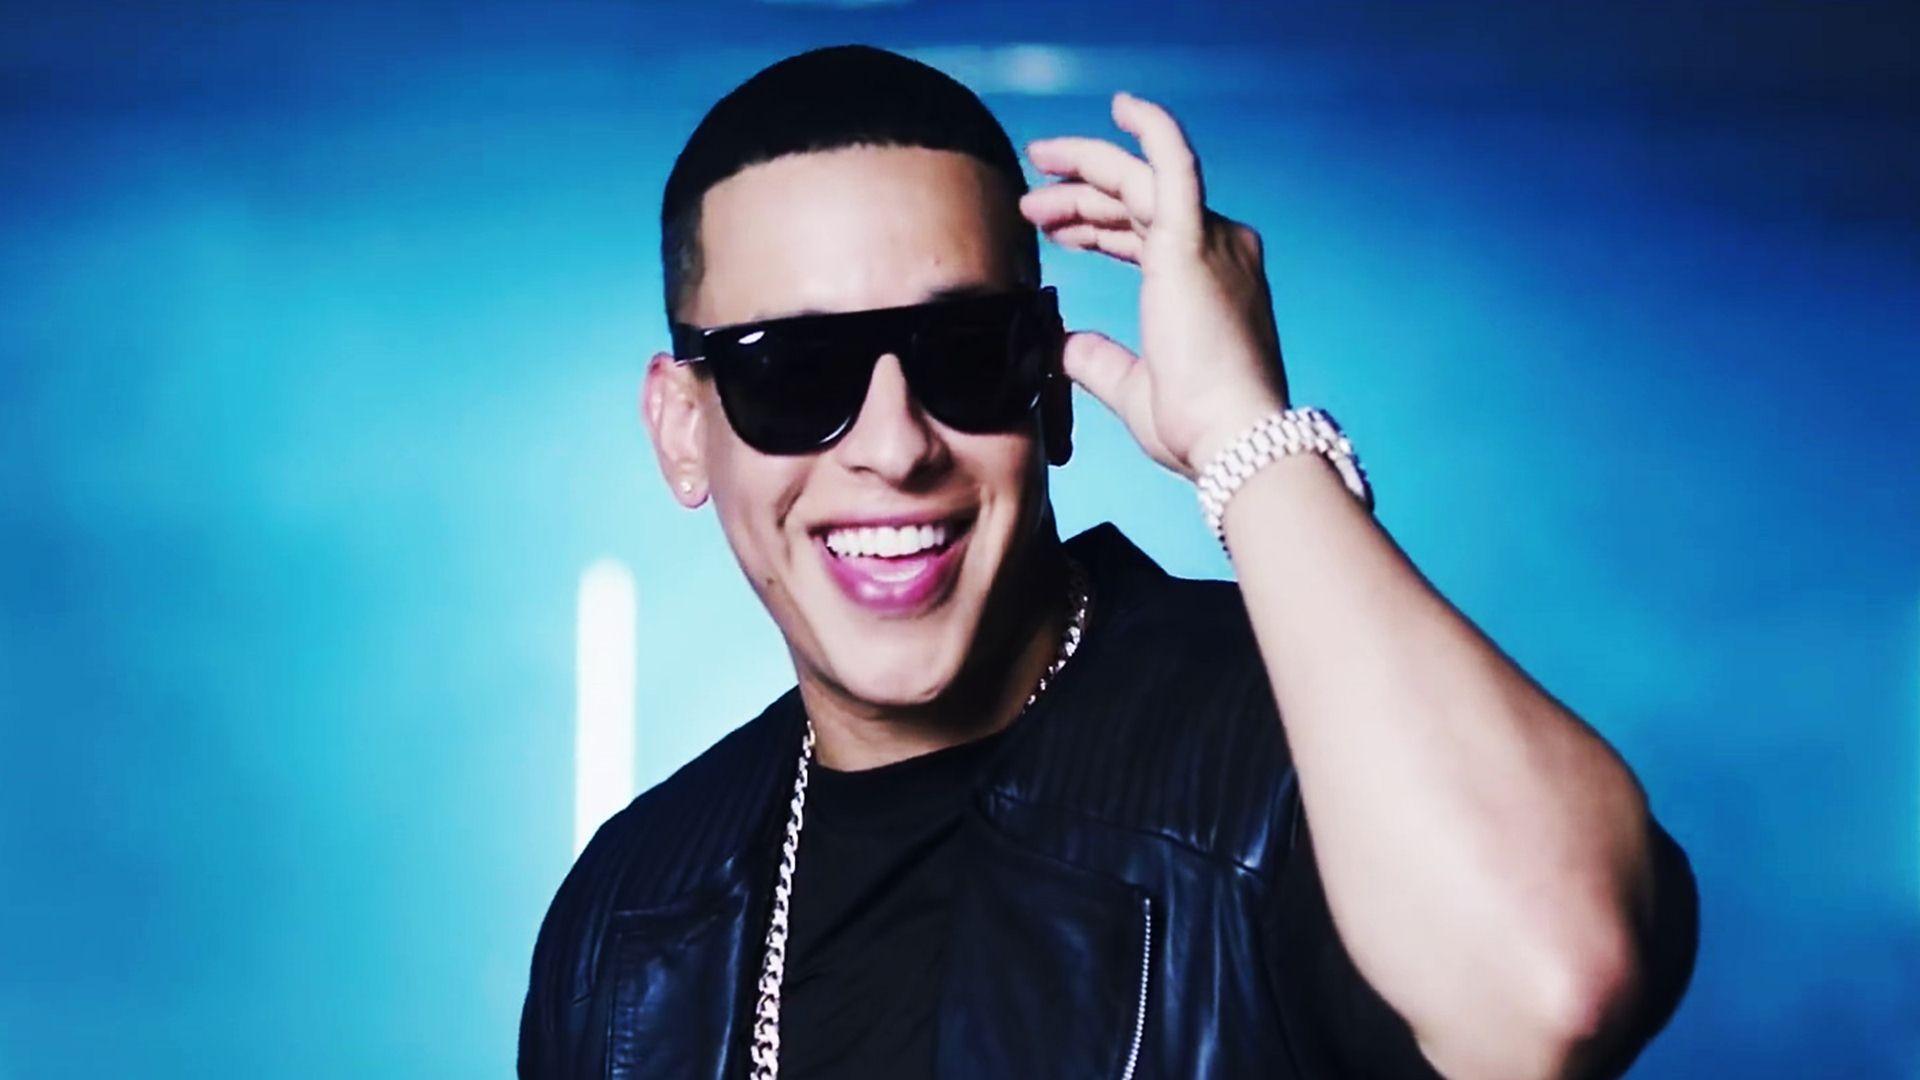 Download wallpapers Daddy Yankee 4k 2020 Puerto Rican singer white neon  lights music stars creative Raymon Luis Ayala Rodríguez superstars  american celebrity Daddy Yankee 4K for desktop with resolution 3840x2400  High Quality